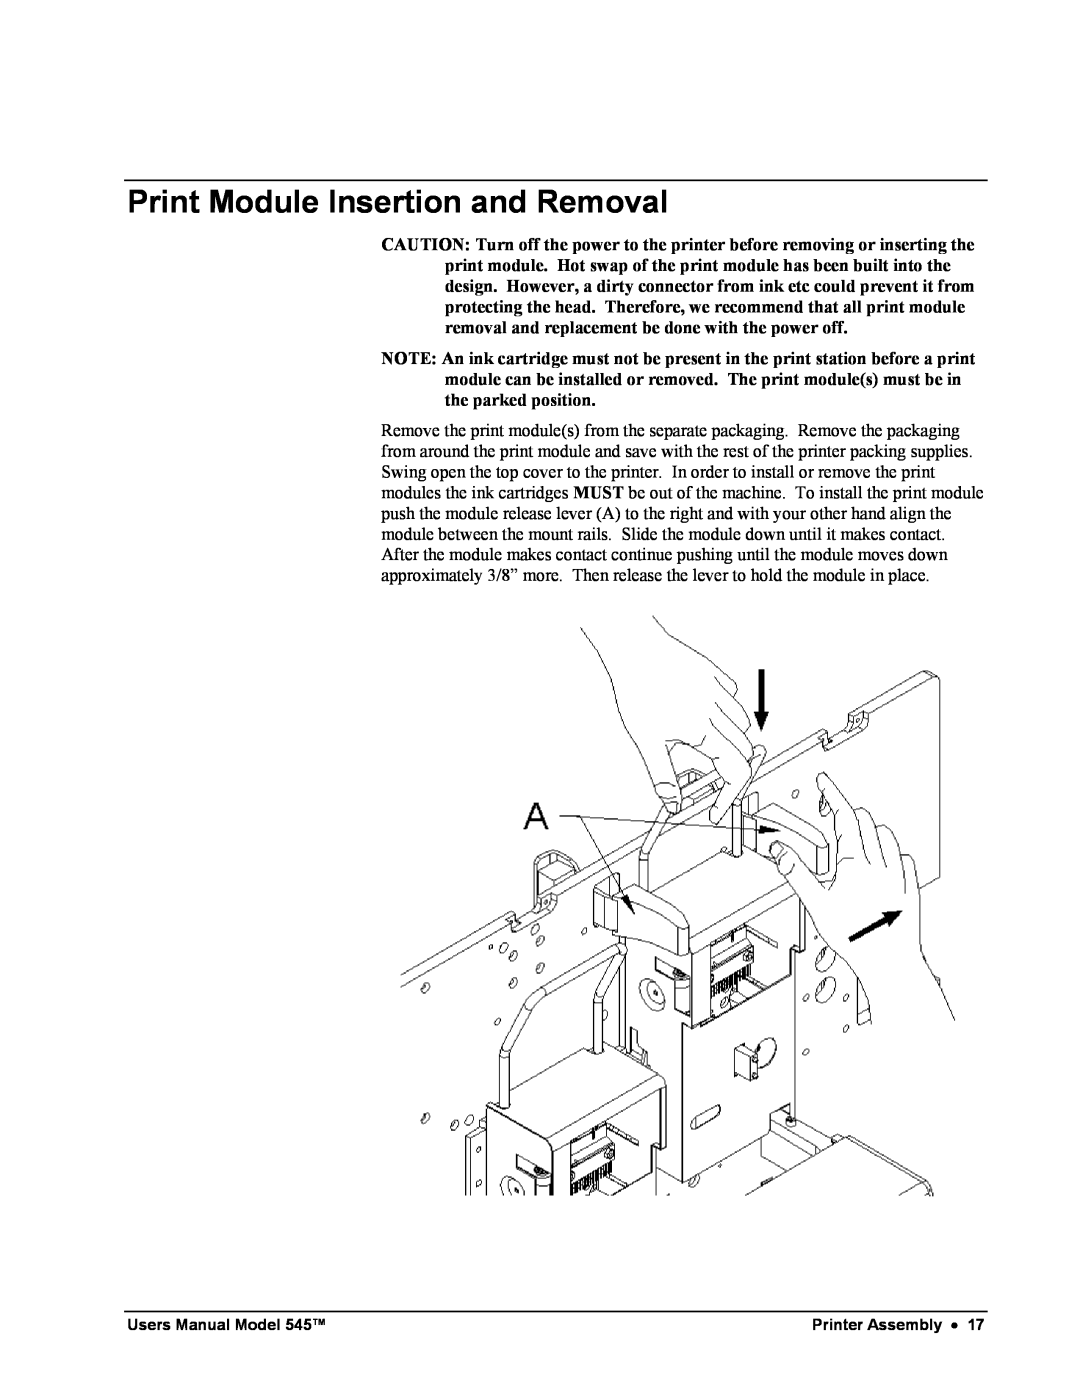 Paxar 545 user manual Print Module Insertion and Removal 